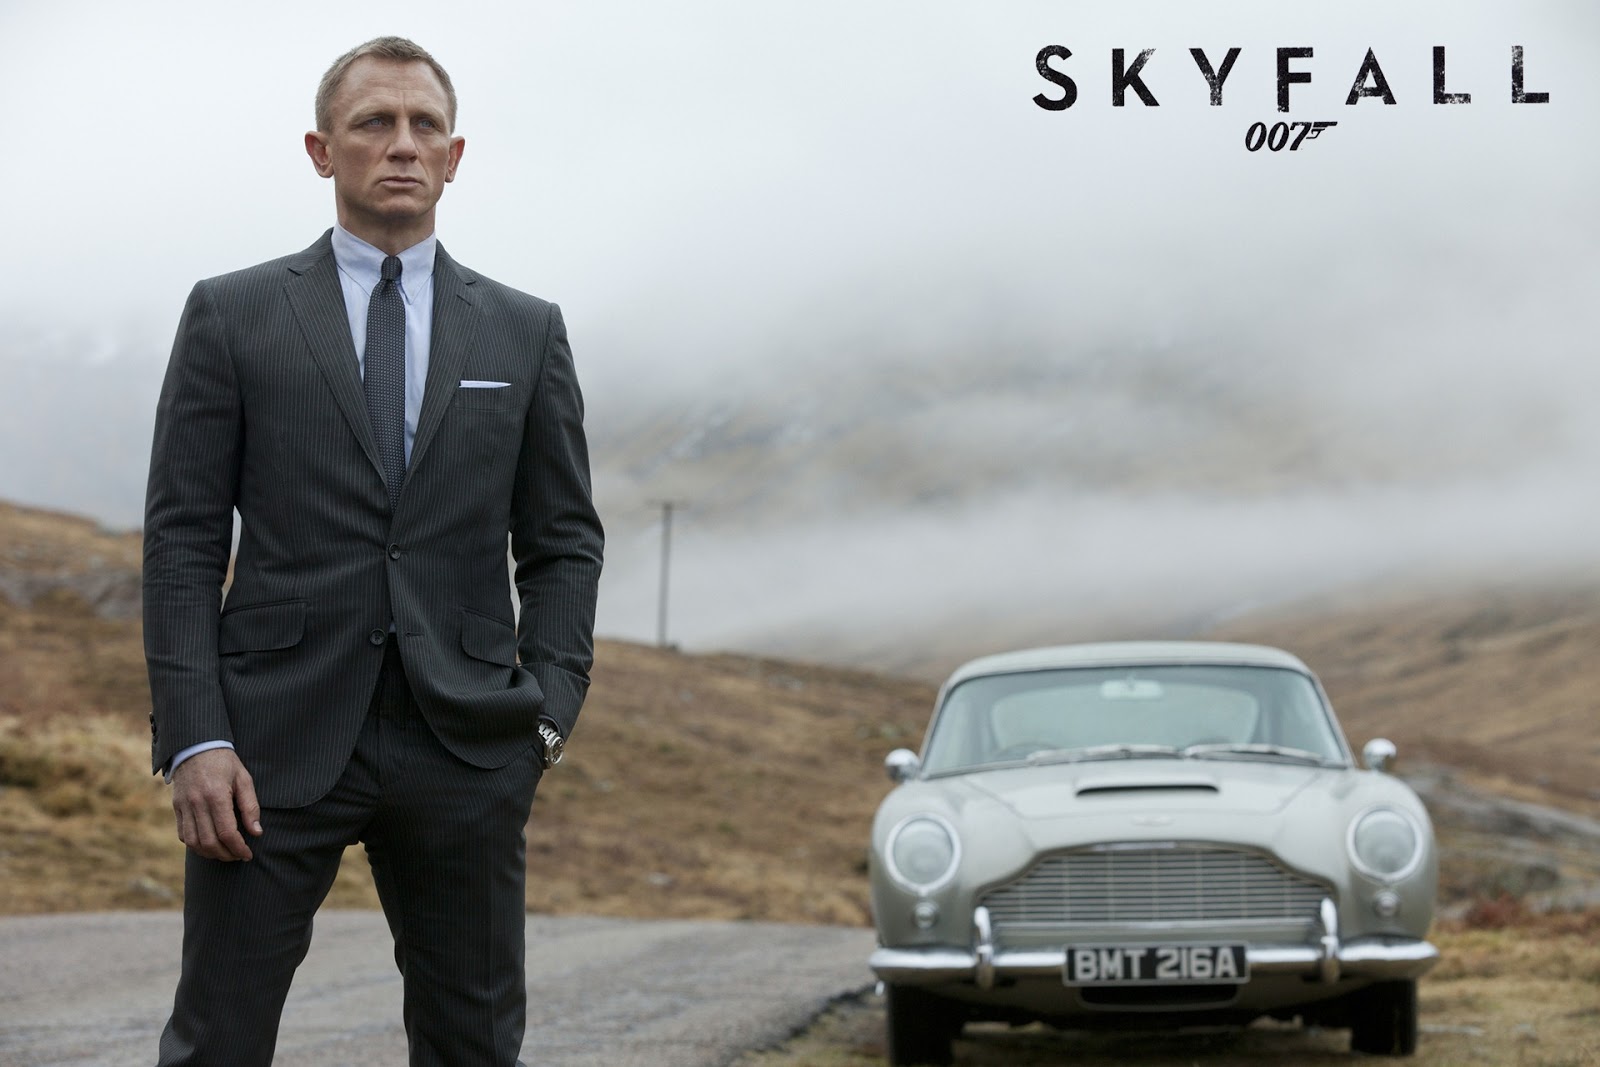 Bond Skyfall HD Wallpaper For iPhone Site